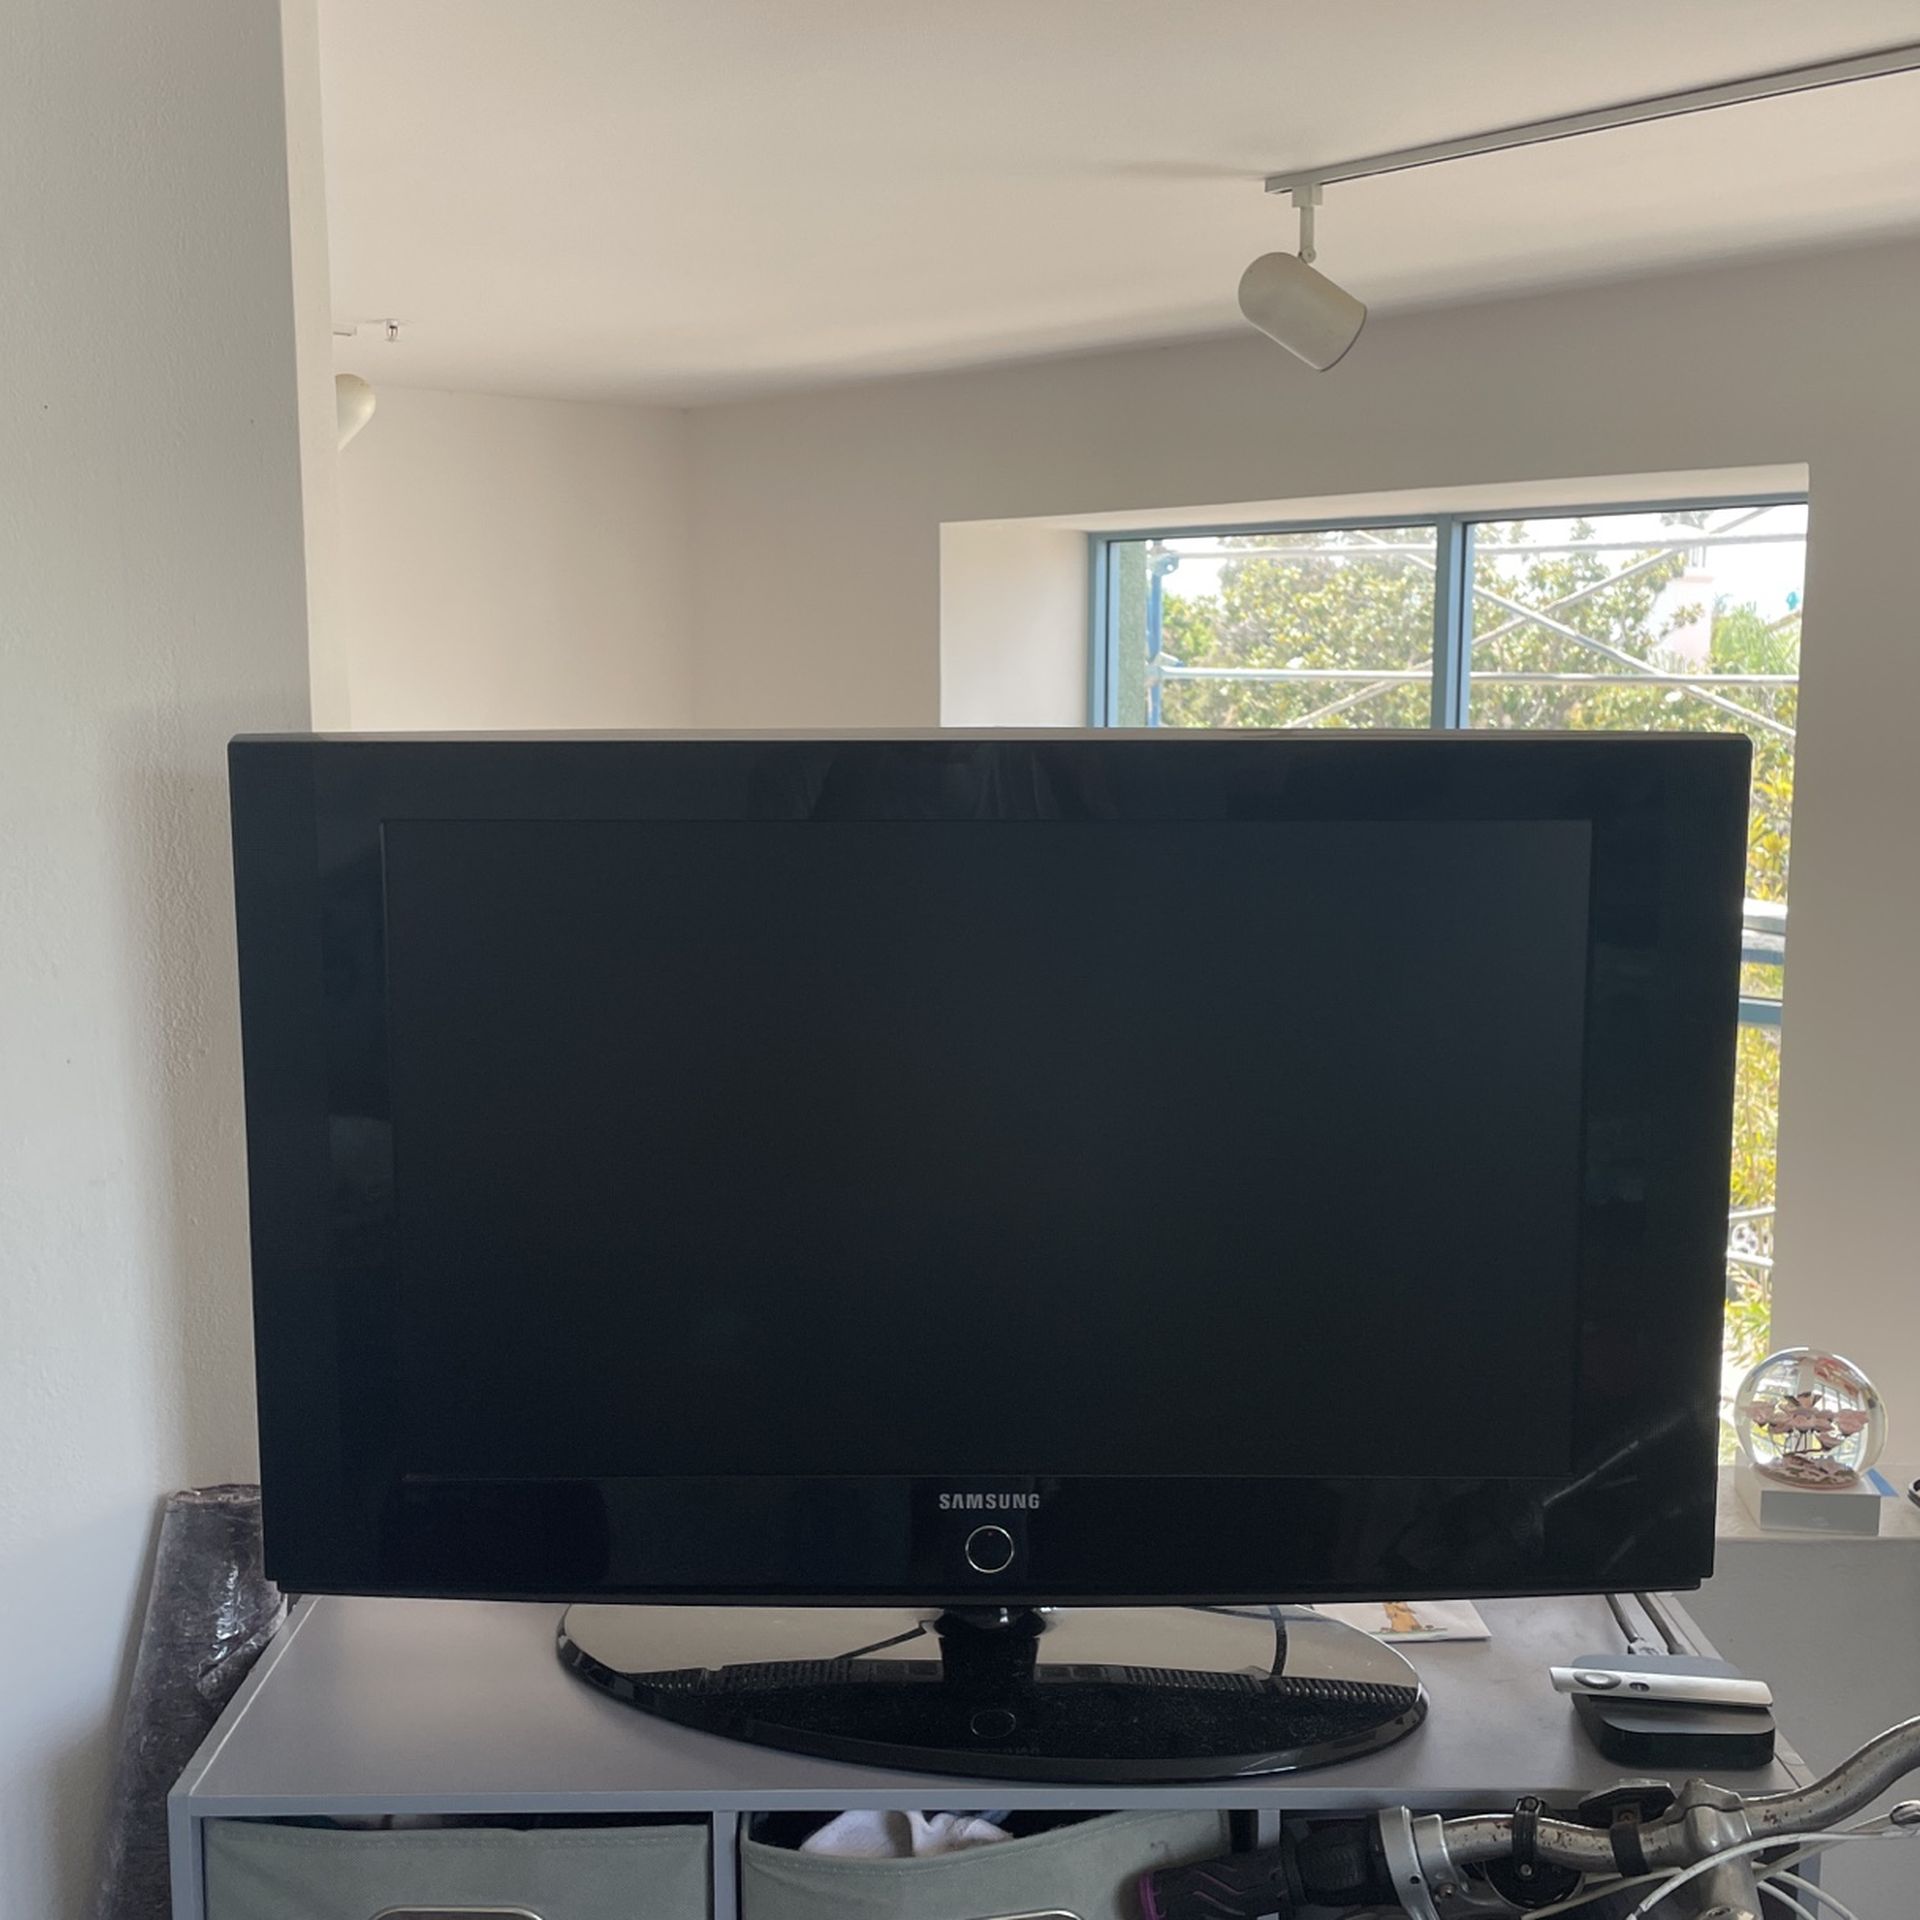 Samsung TV (32 in) and Apple TV